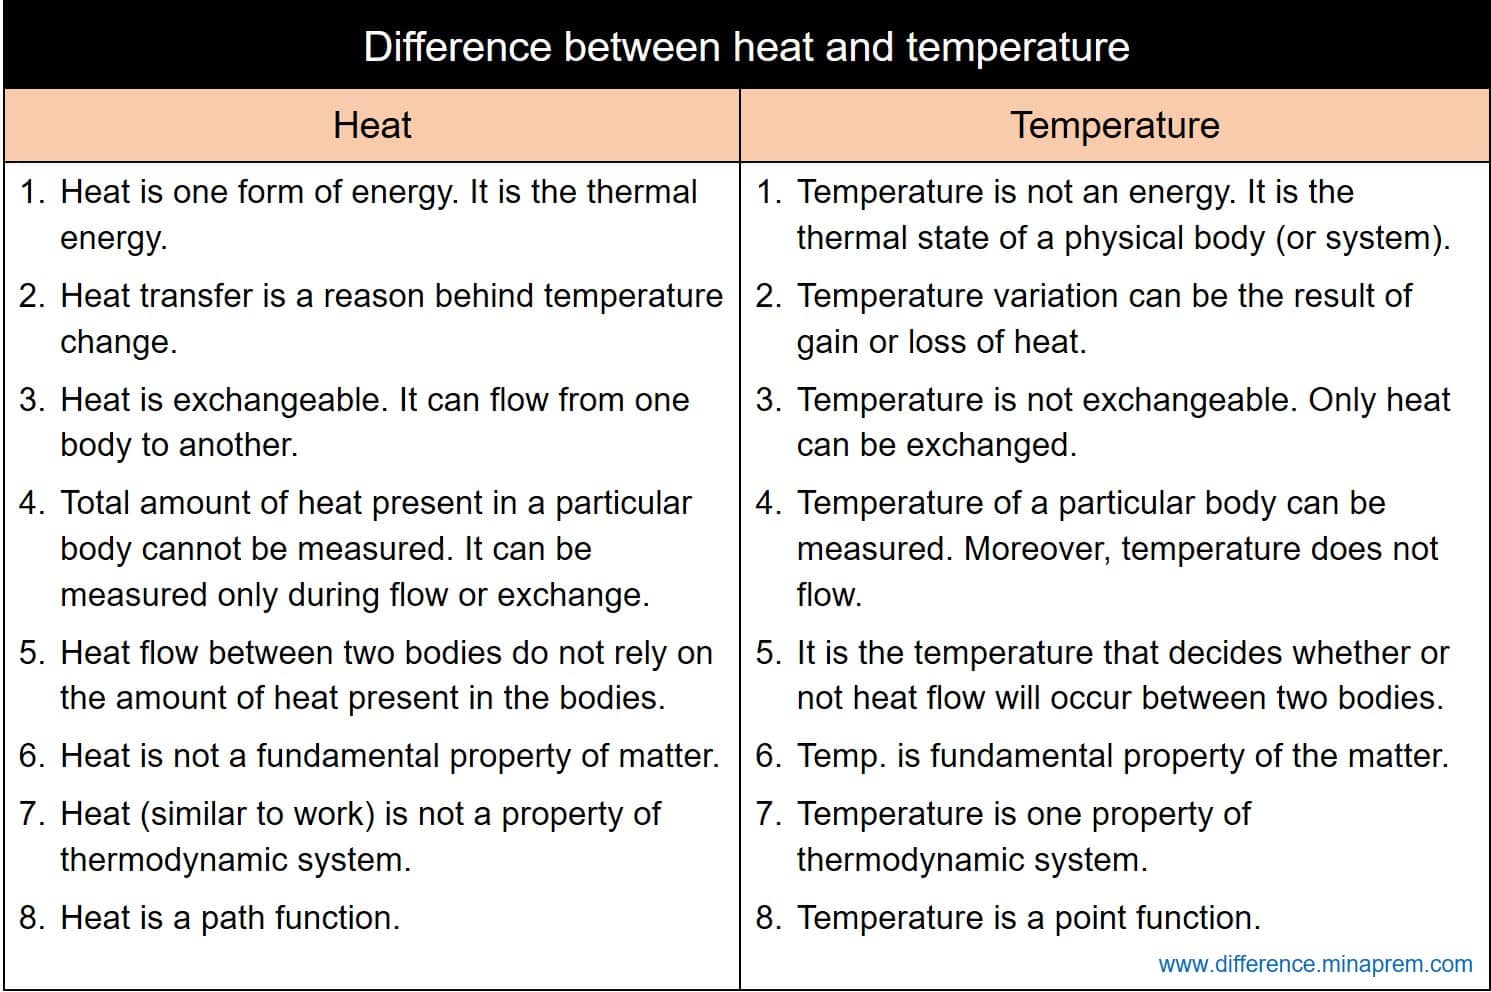 Difference between heat and temperature